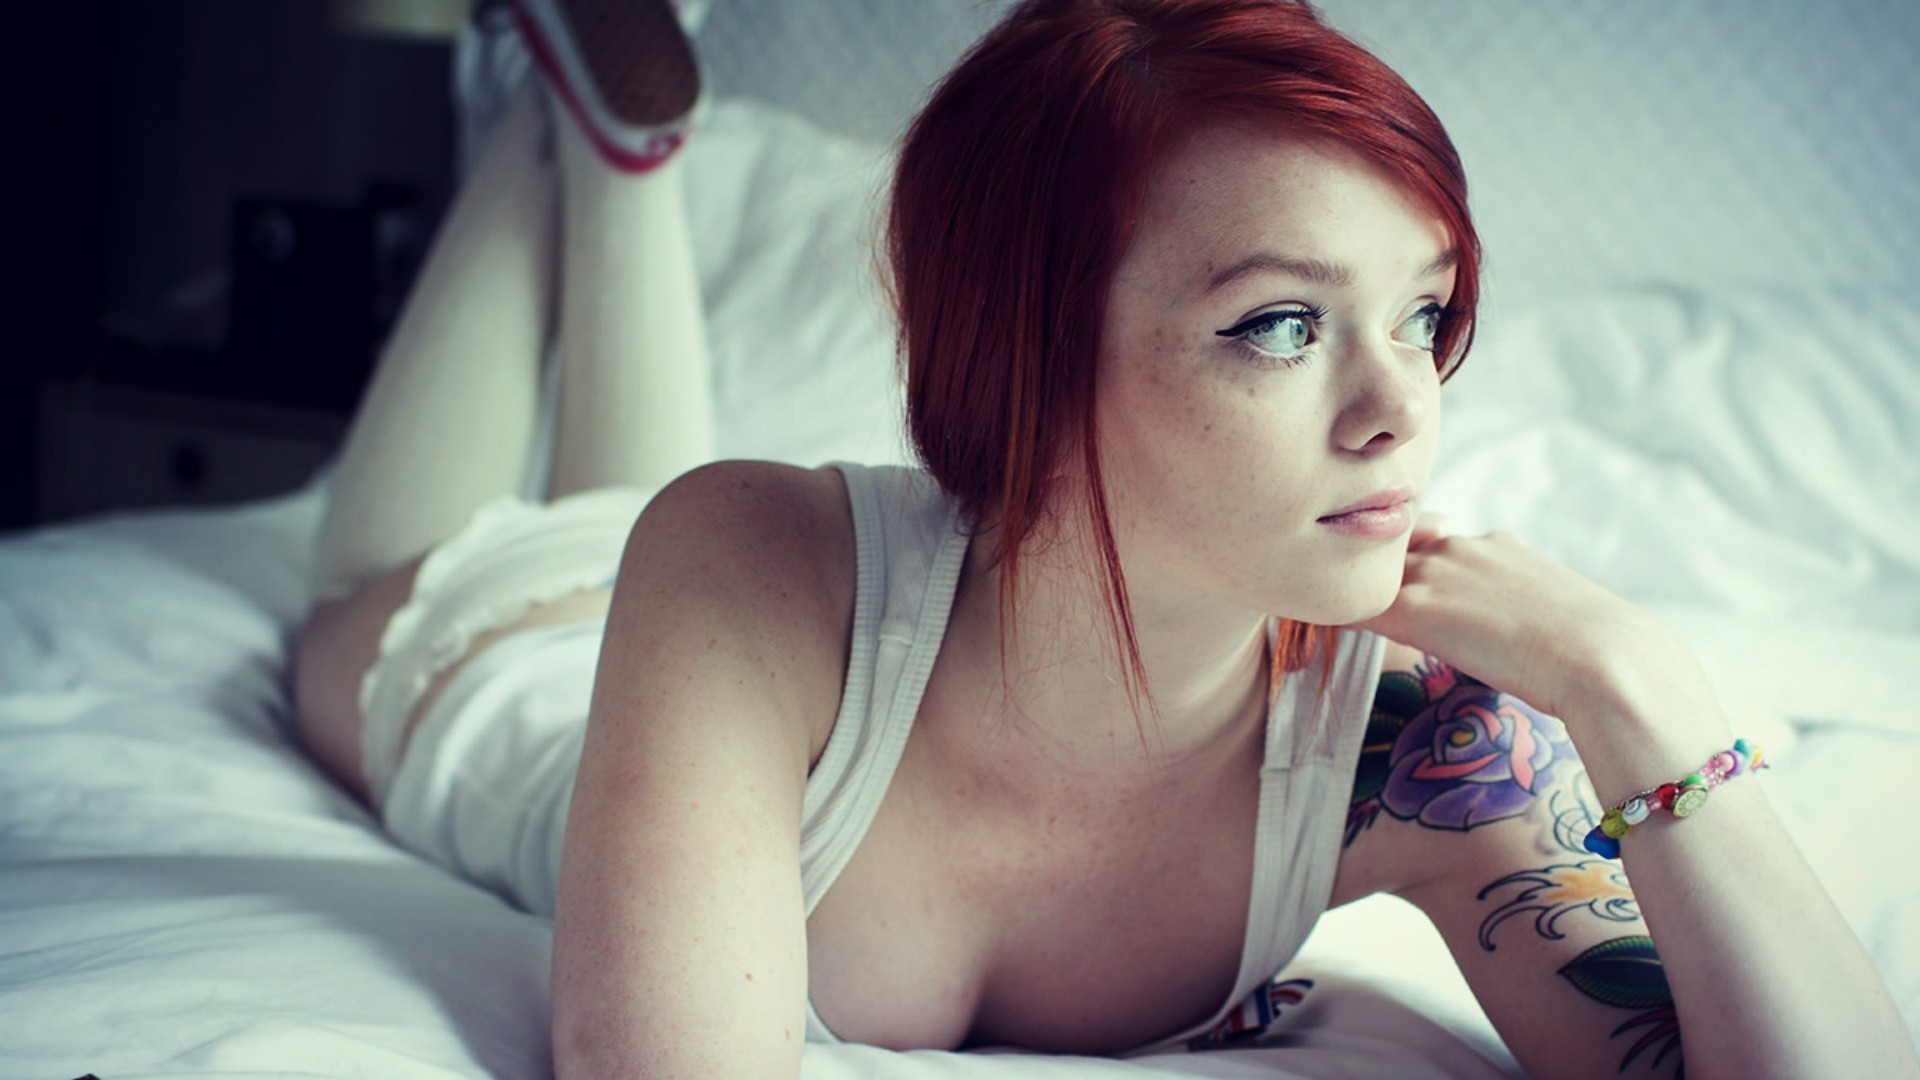 People 1920x1080 cleavage redhead tattoo Lass Suicide Suicide Girls women in bed looking away bracelets lying on front women indoors inked girls legs up indoors model Scottish Women British British women scottish